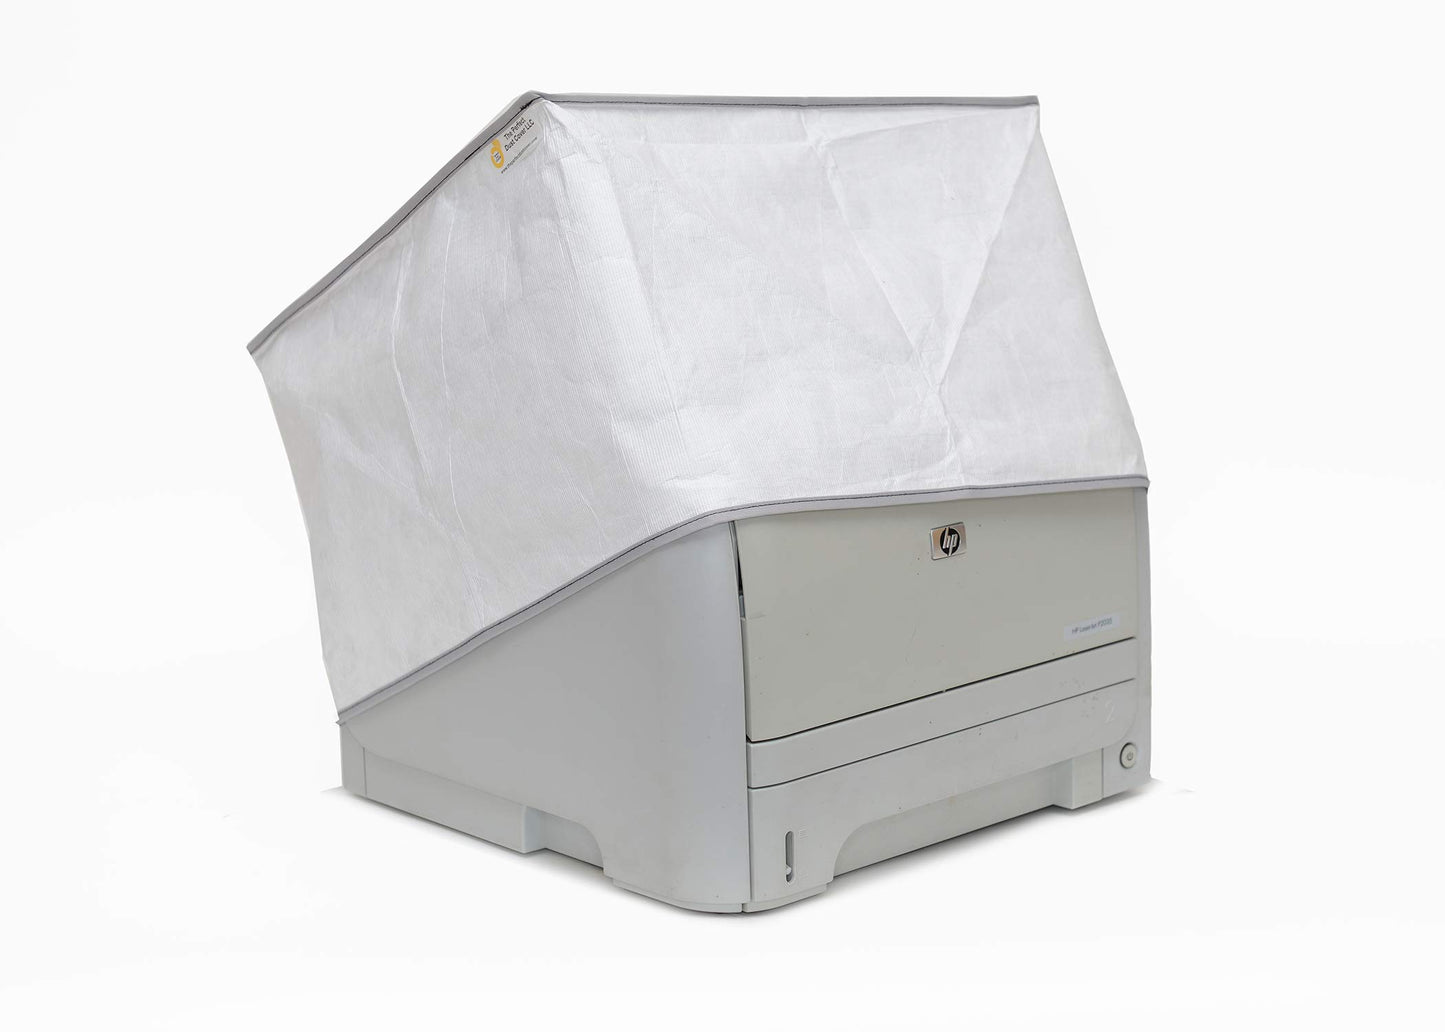 The Perfect Dust Cover, White Vinyl Cover for Canon Pixma TS6320 All-in-One Inkjet Printer, Anti Static and Waterproof Dimensions 14.9''W x 14.2''D x 5.6''H by The Perfect Dust Cover LLC